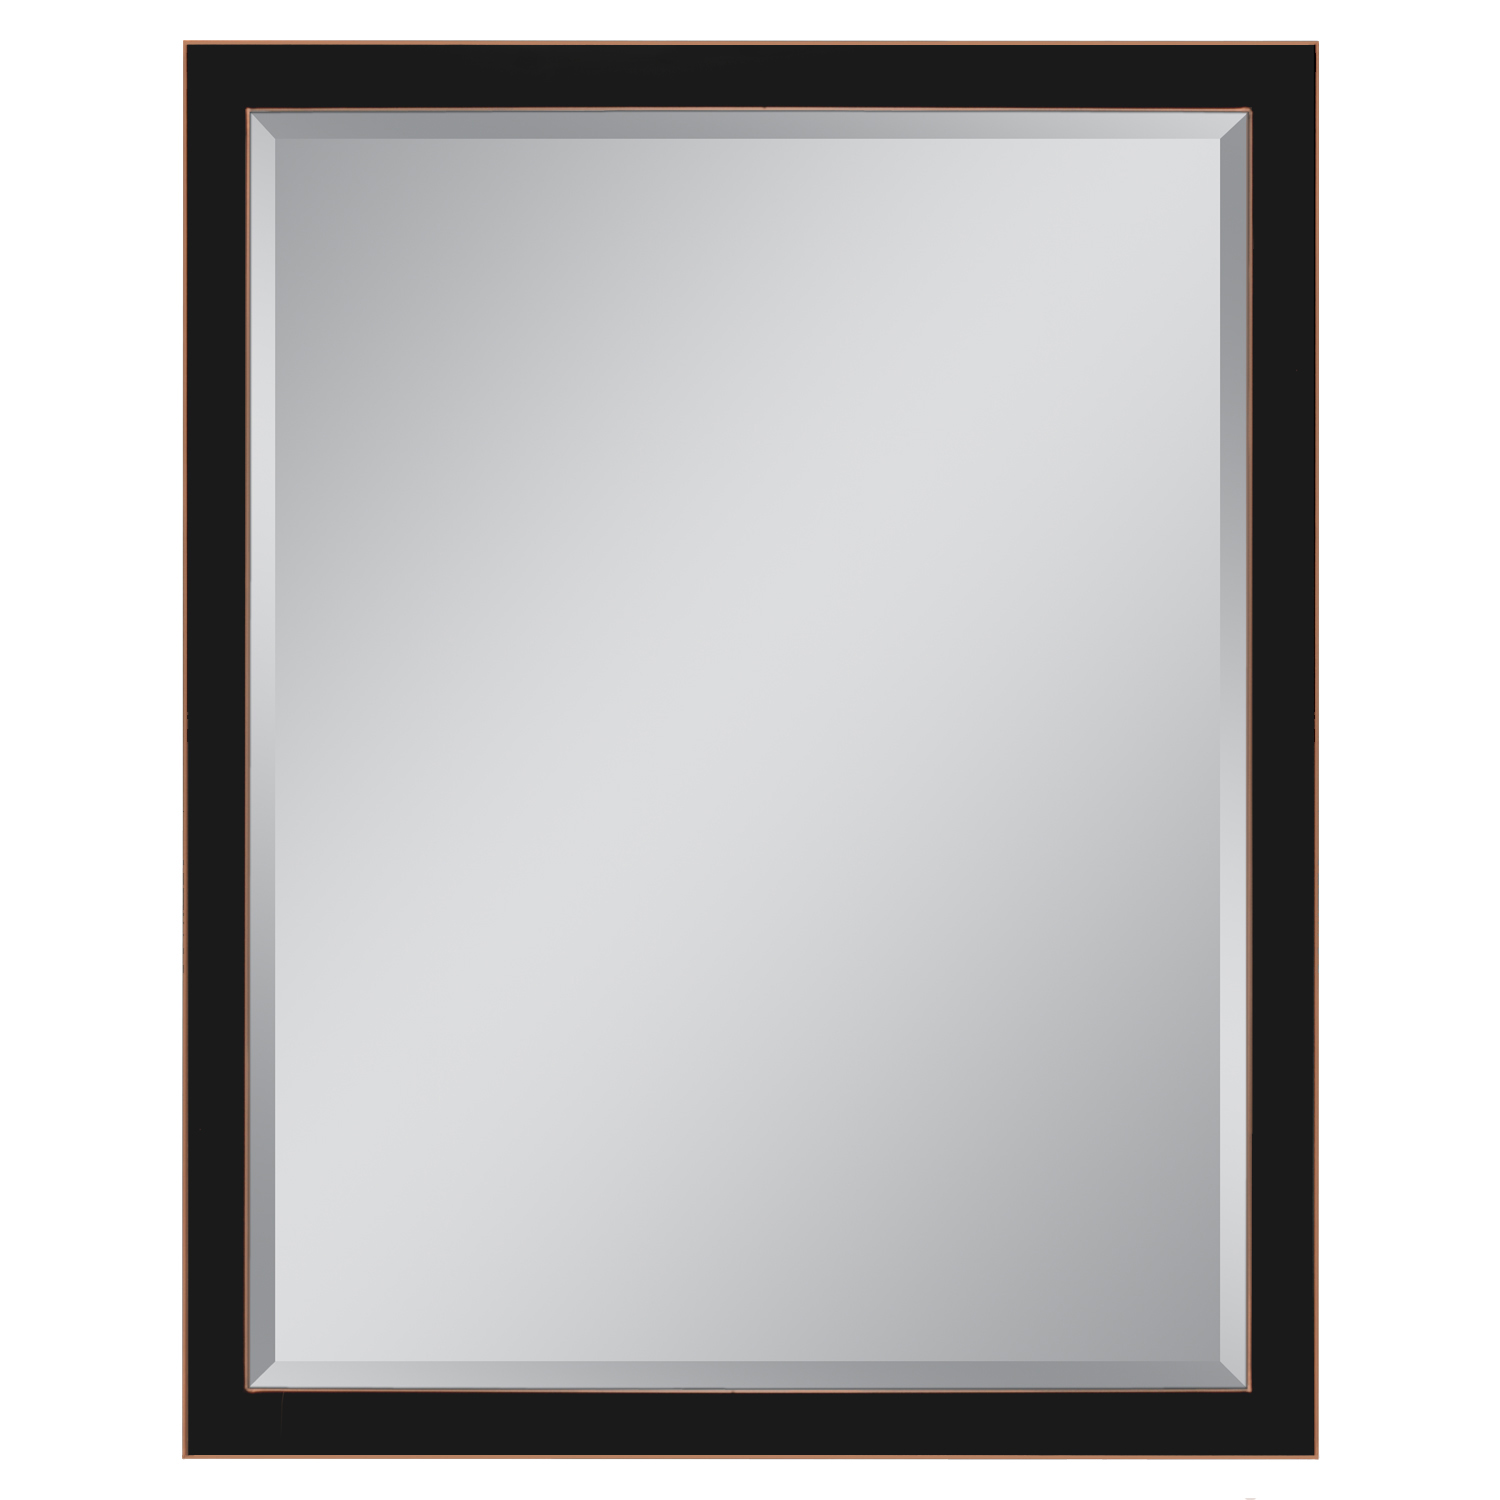 8026 30 X 40 In. Classic Oil Rubbed Bronze 1.5 In. Wide Metal Frame Wall Mirror